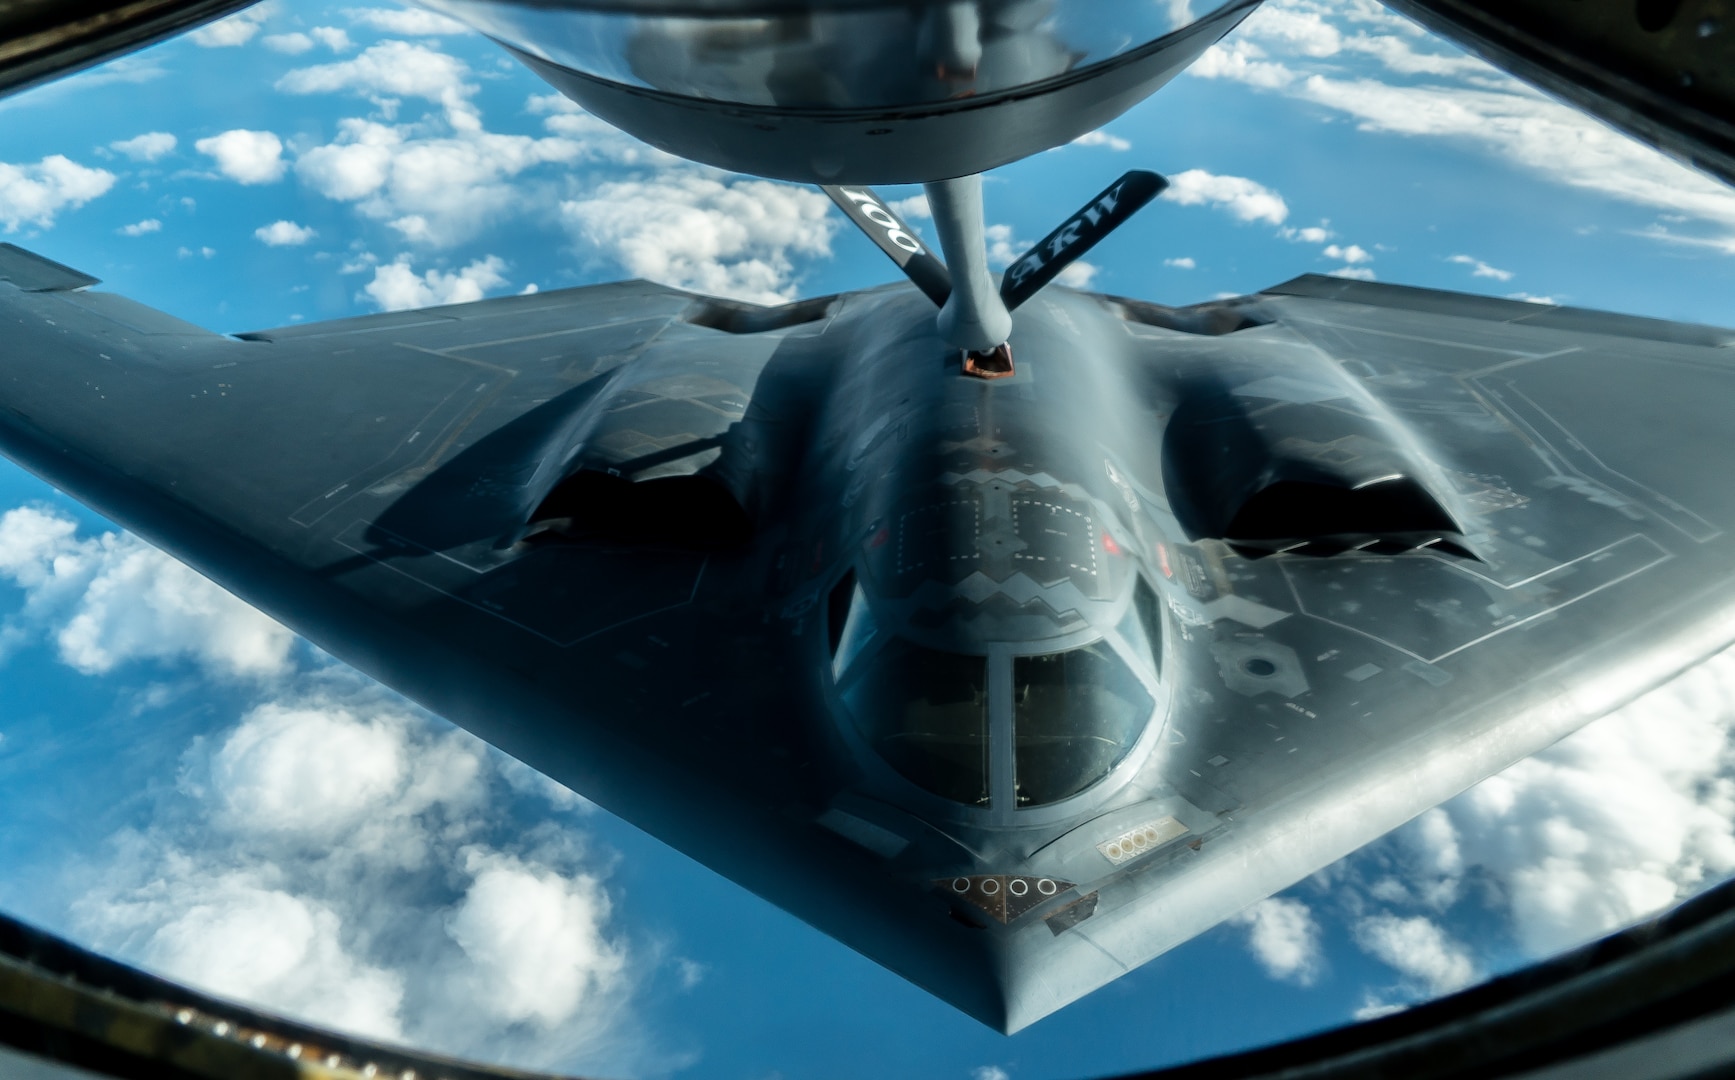 A U.S. Air Force B-2 Spirit assigned to the 509th Bomb Wing from Whiteman Air Force Base, Missouri, receives fuel from a 100th Air Refueling Wing KC-135 Stratotanker during Global Thunder 20, Oct. 28, 2019. Global Thunder is an annual command and control exercise that assesses and validates all of U.S. Strategic Command’s mission areas, tests joint and field training operations, and has a specific focus on nuclear readiness. (U.S. Air Force photo by Staff Sgt. Trevor T. McBride)